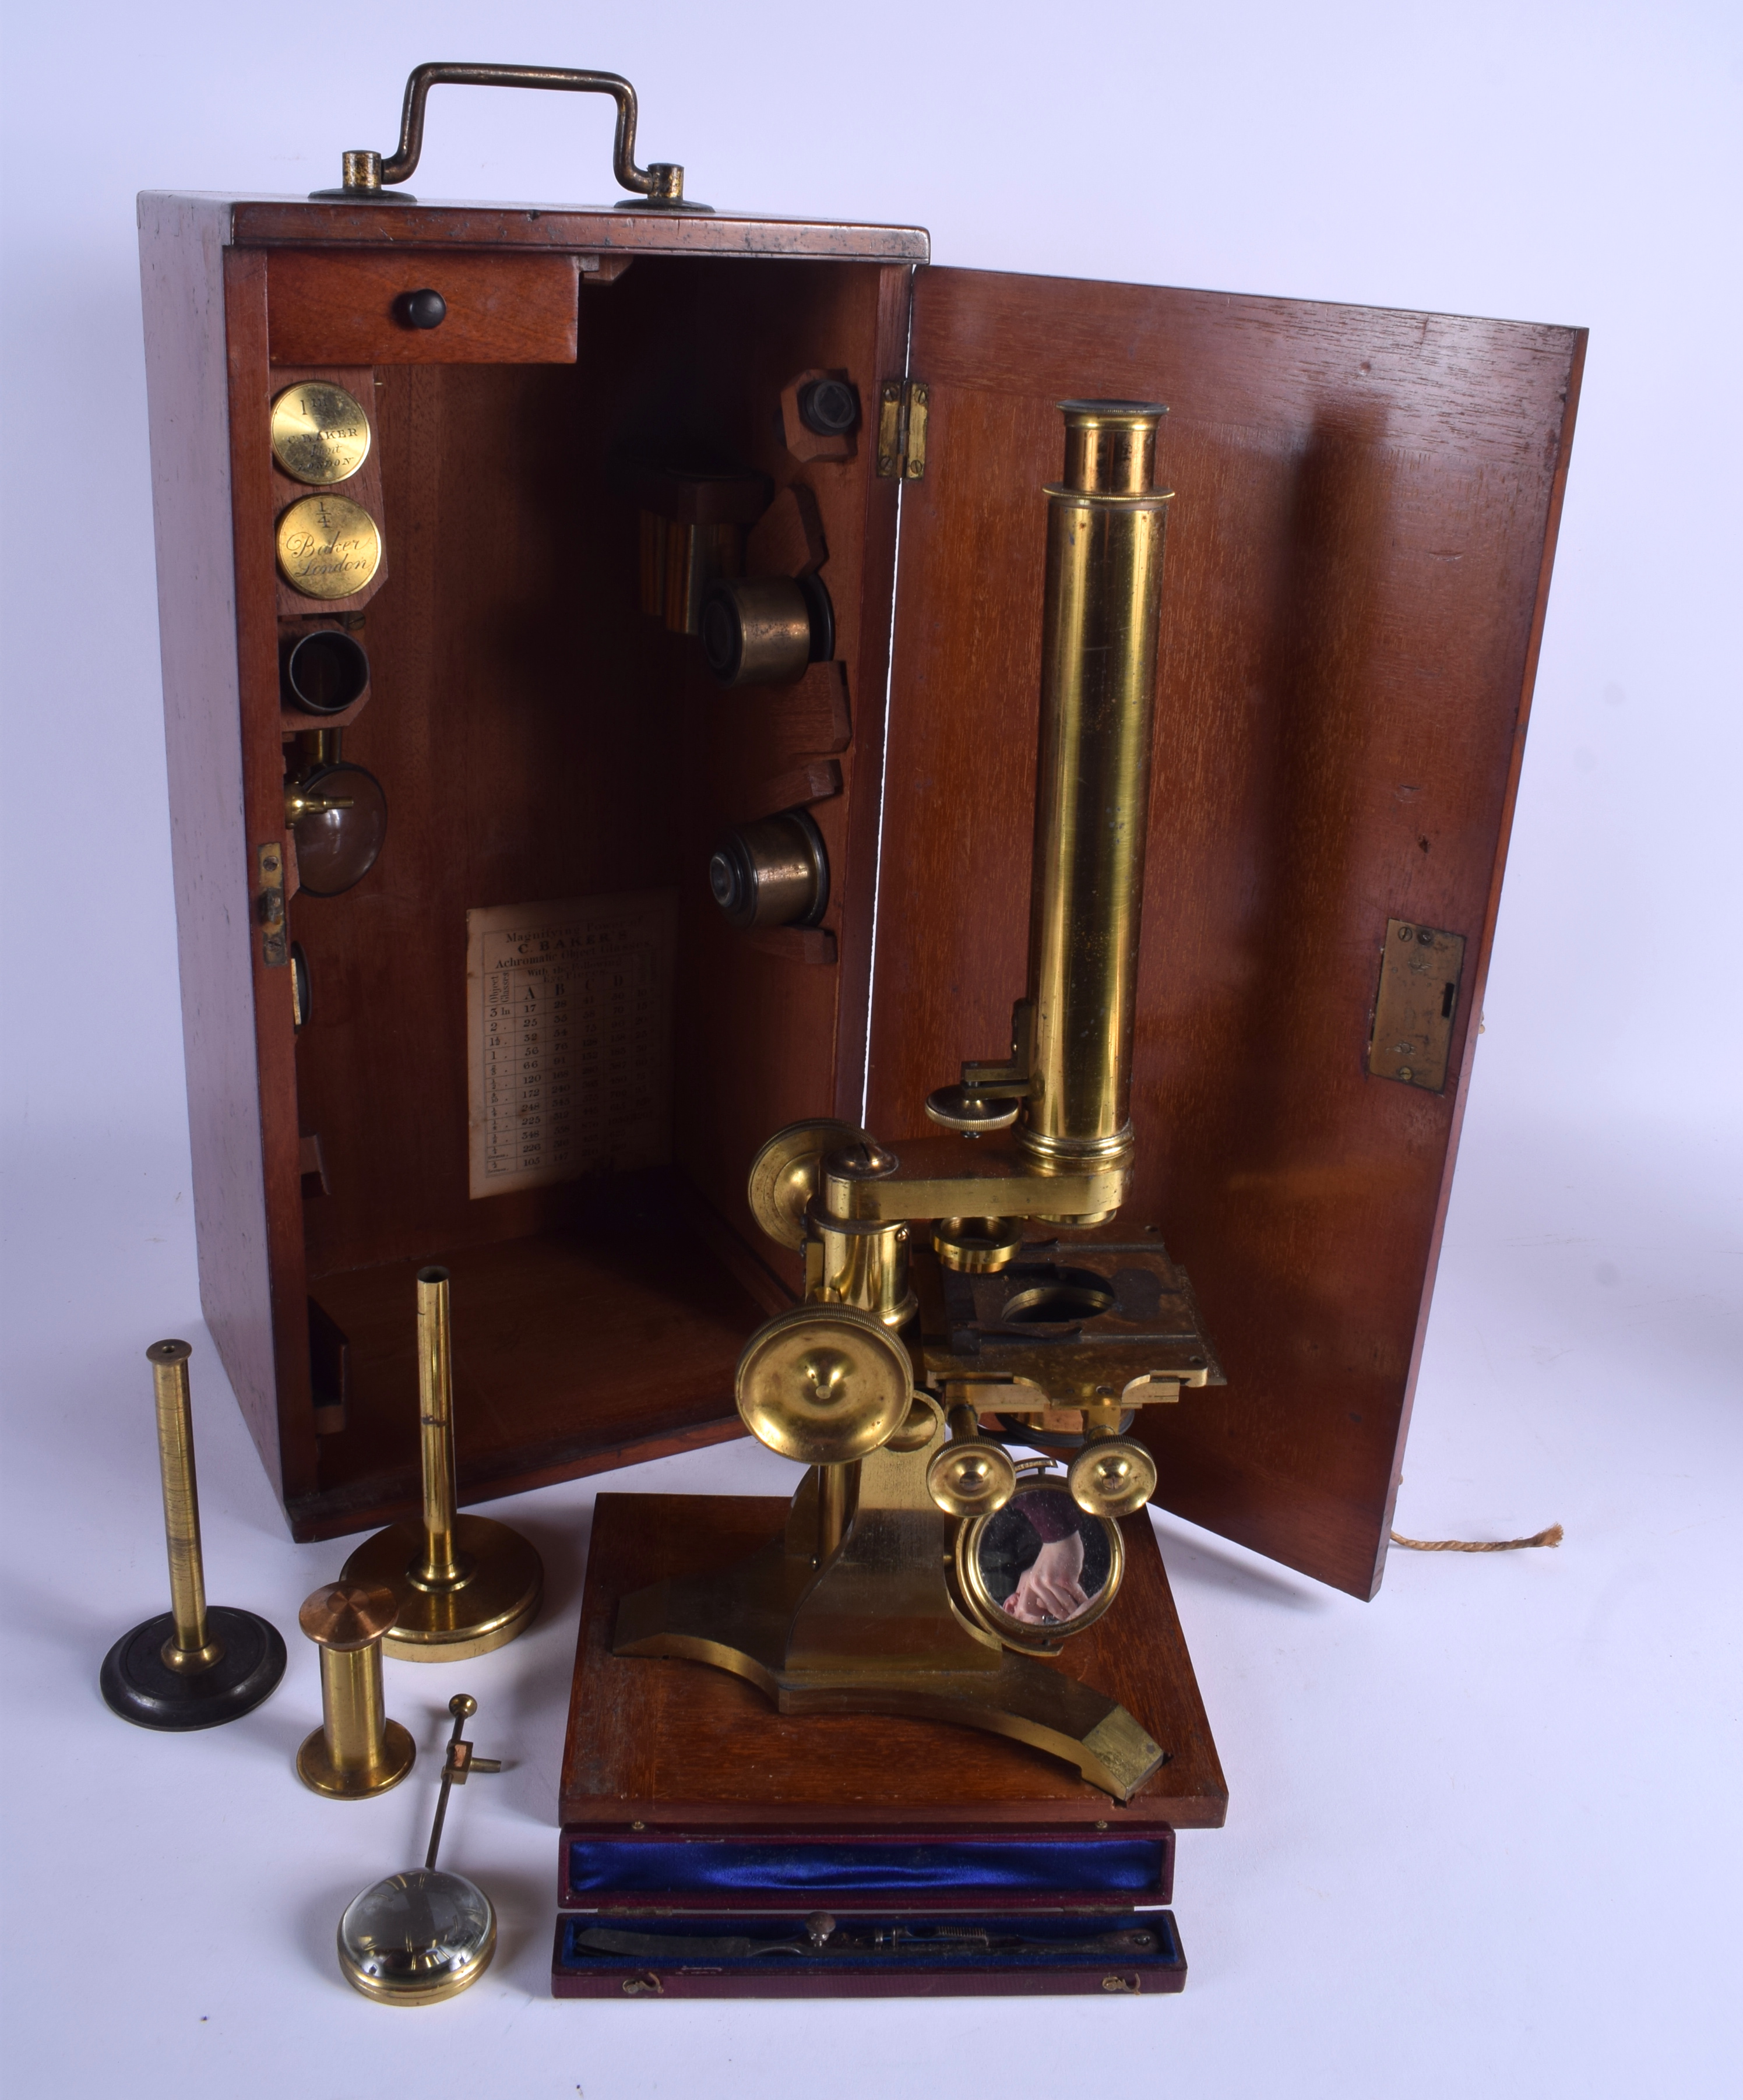 A GOOD LATE 19TH CENTURY CHARLES BAKER BRASS ENGLISH MICROSCOPE C1870 with various accessories and l - Image 3 of 4